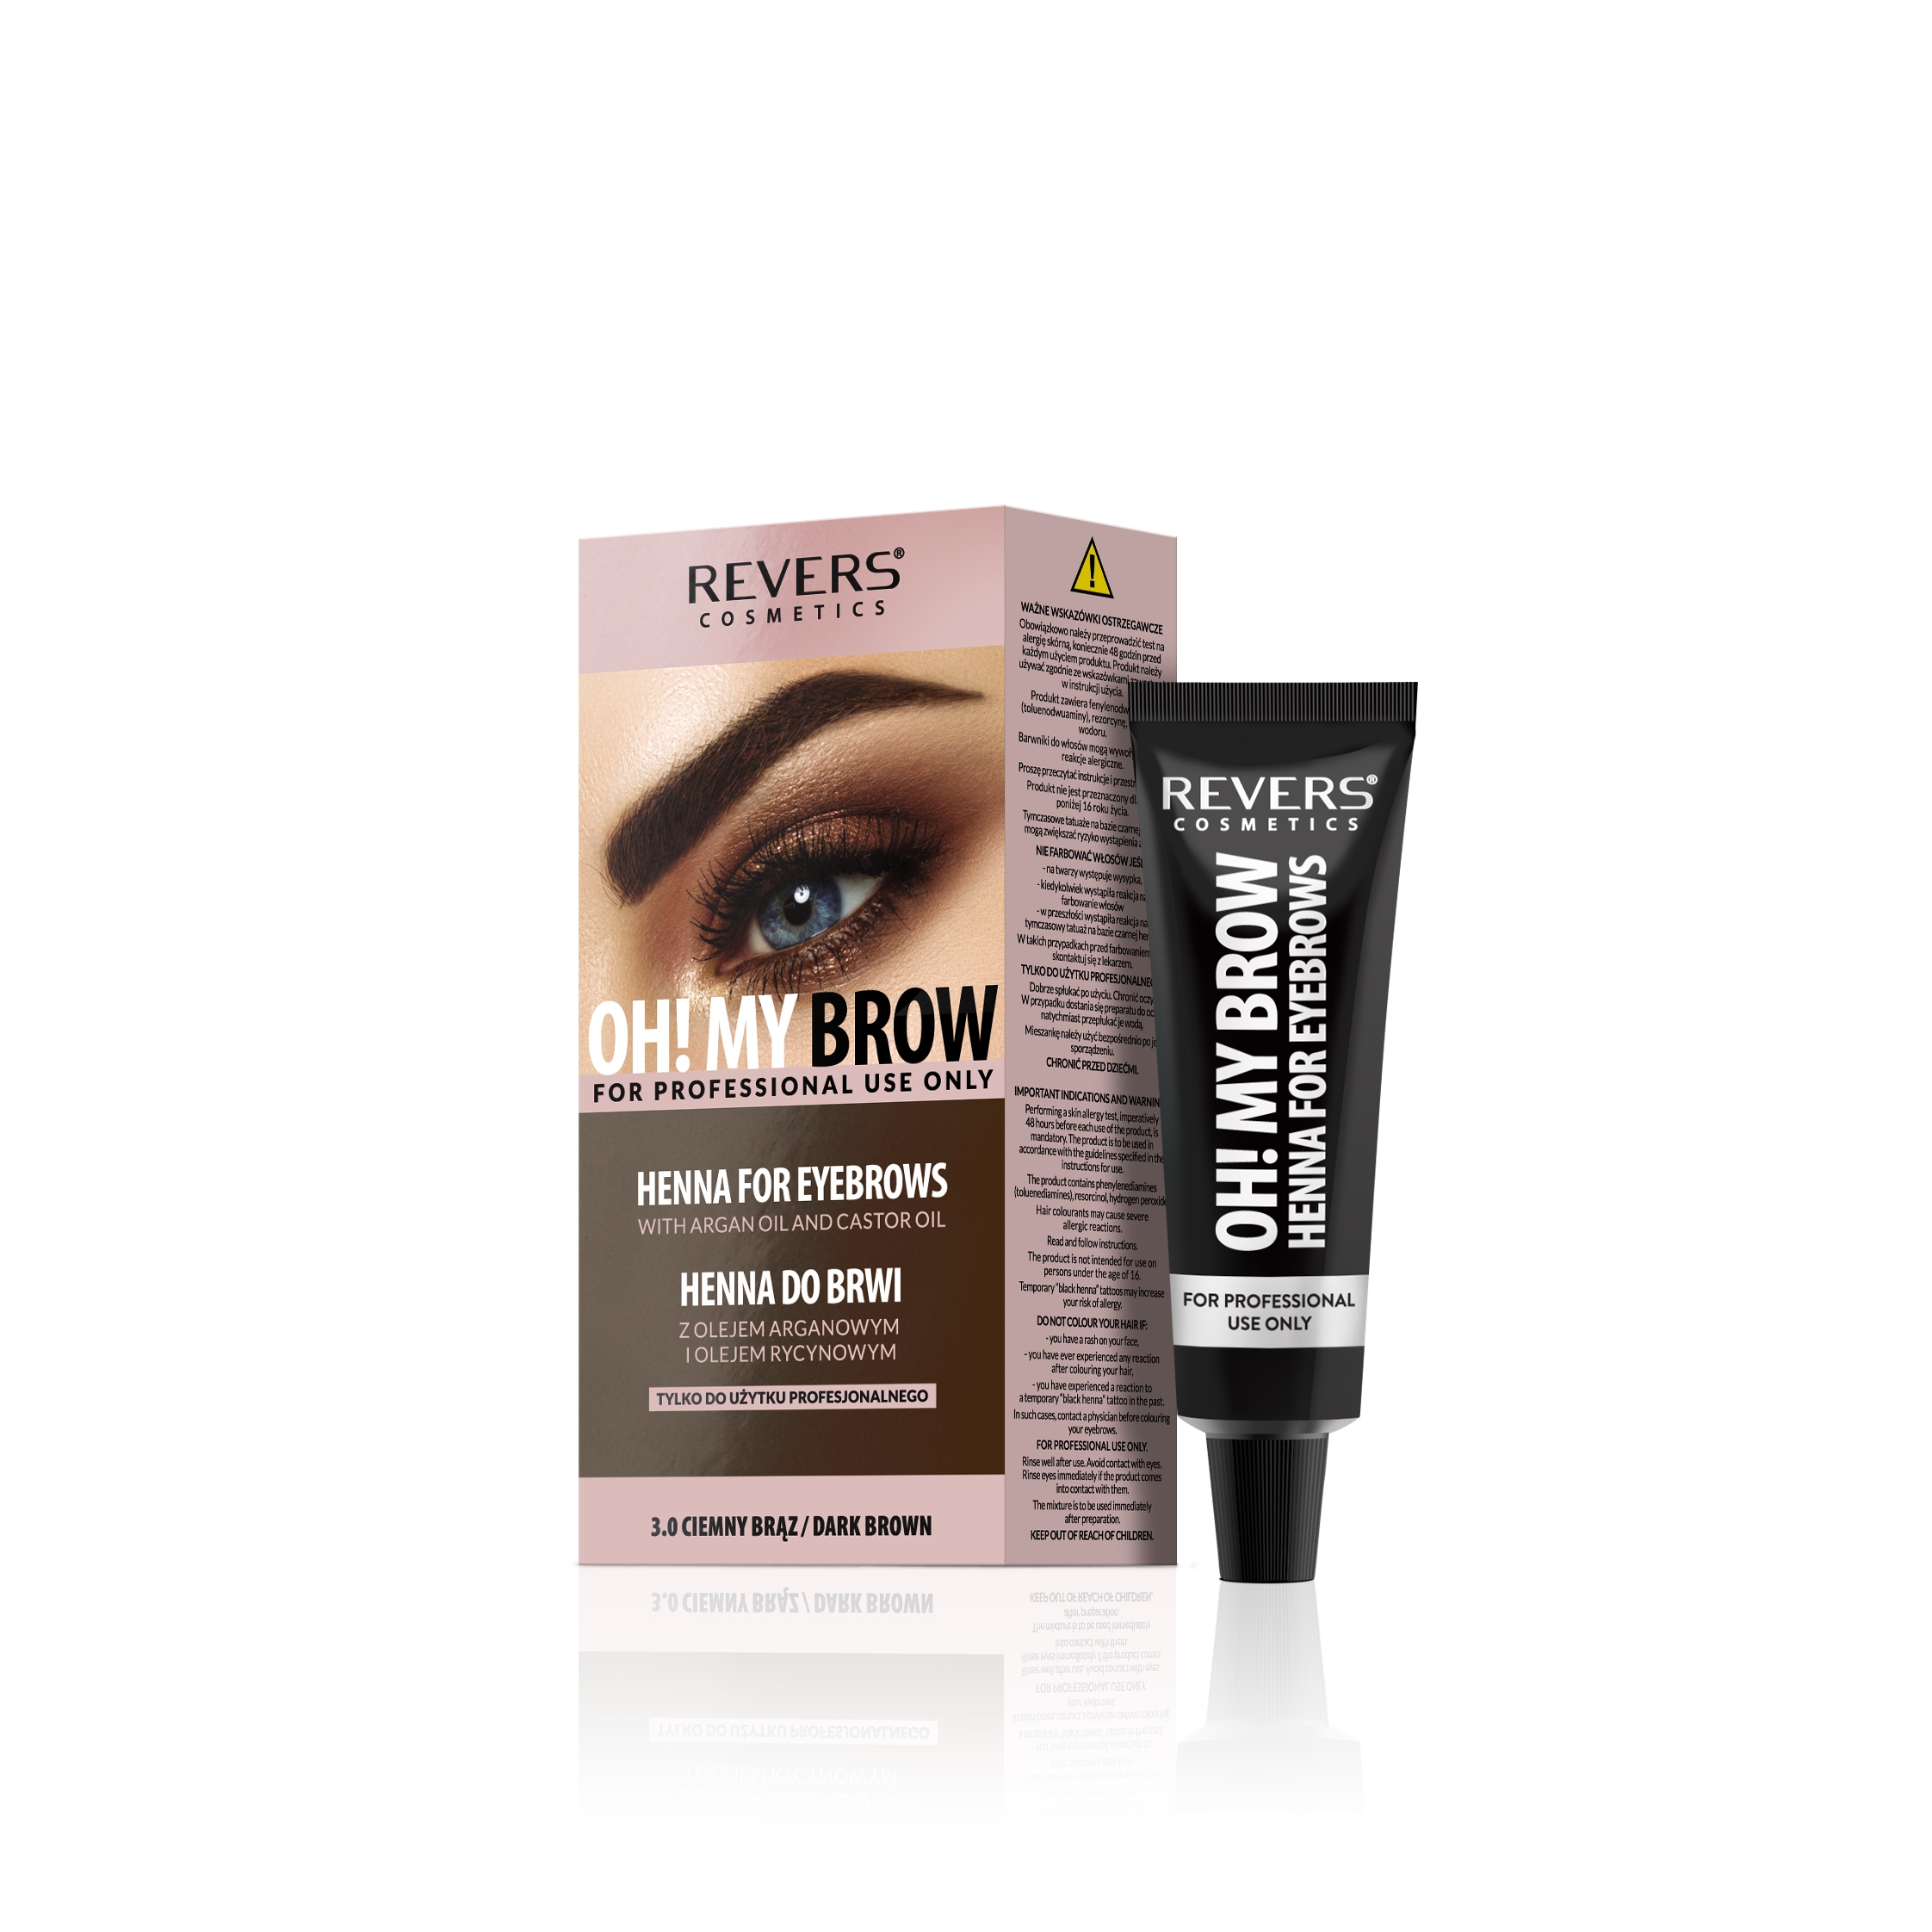 HENNA FOR EYEBROWS OH!MY BROW 3.0 DARK BROWN with argan oil and 